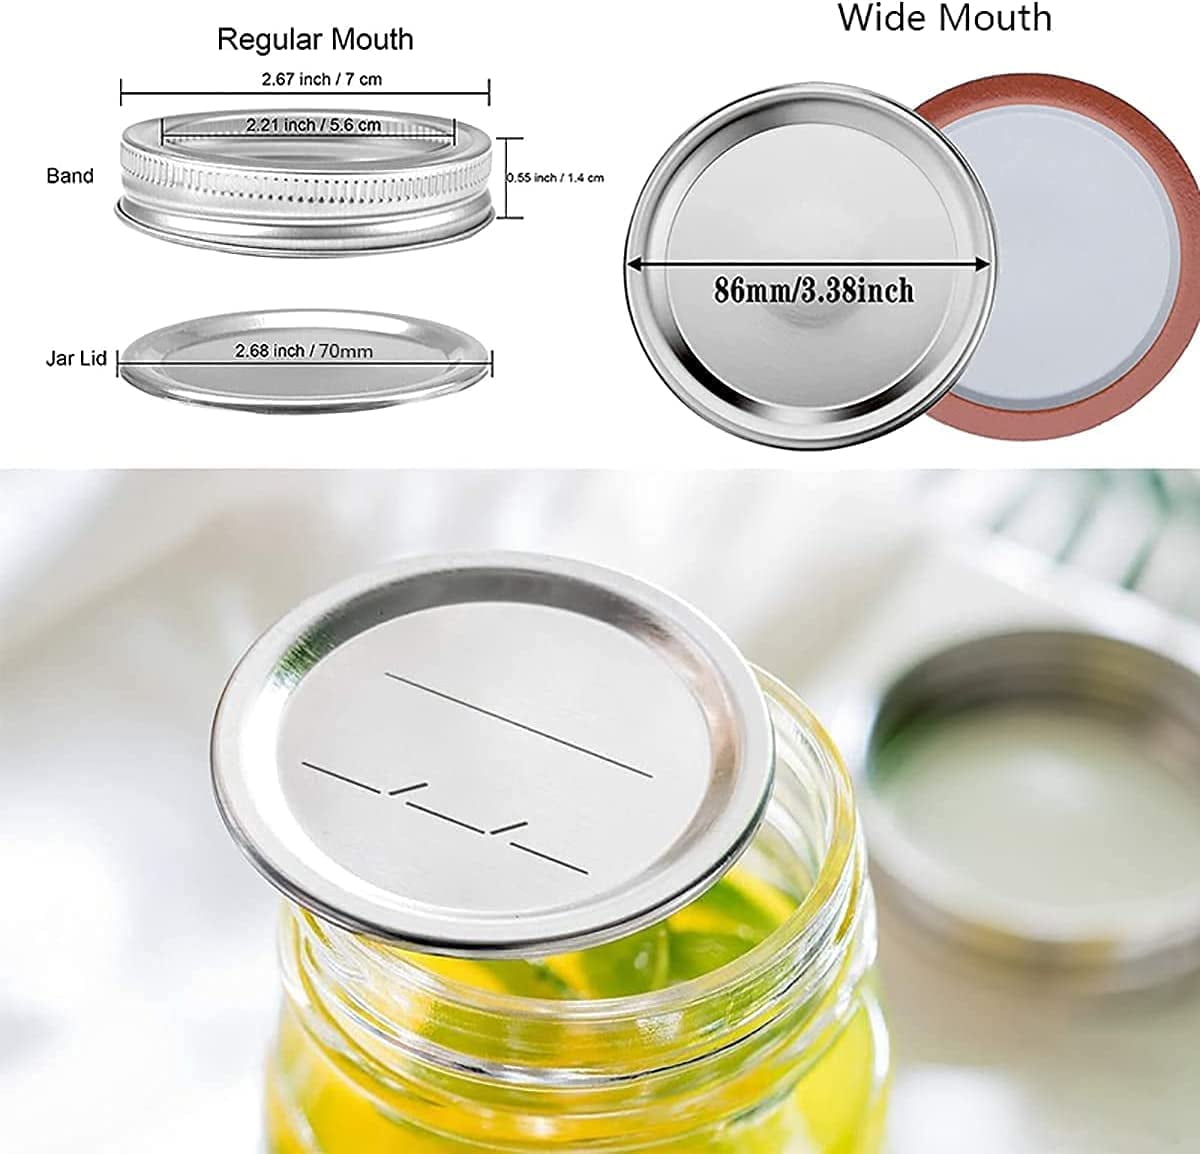 Regular Mouth Mason Jar Lids for Ball and Kerr Jars Silver, 26 Count FGSAEOR Canning Lids Split-Type Metal Canning Jar Lids with Silicone Seals for Canning 